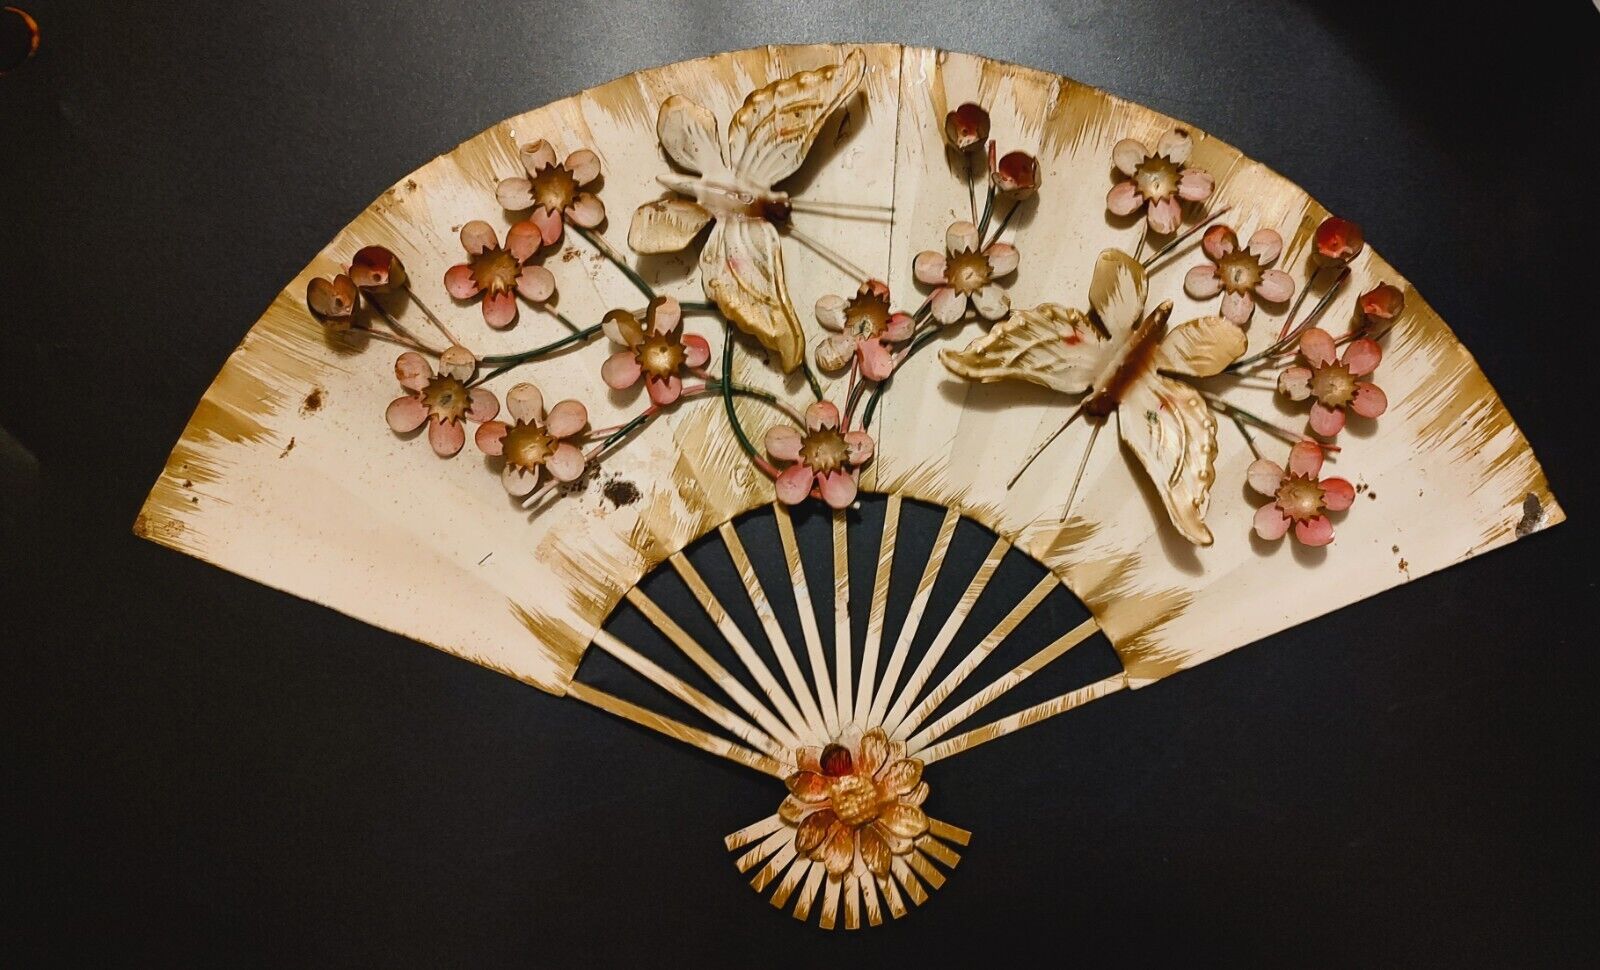 Vintage Metal Fan Tole Painted With Cherry Blossoms And Butterflies Hong Kong